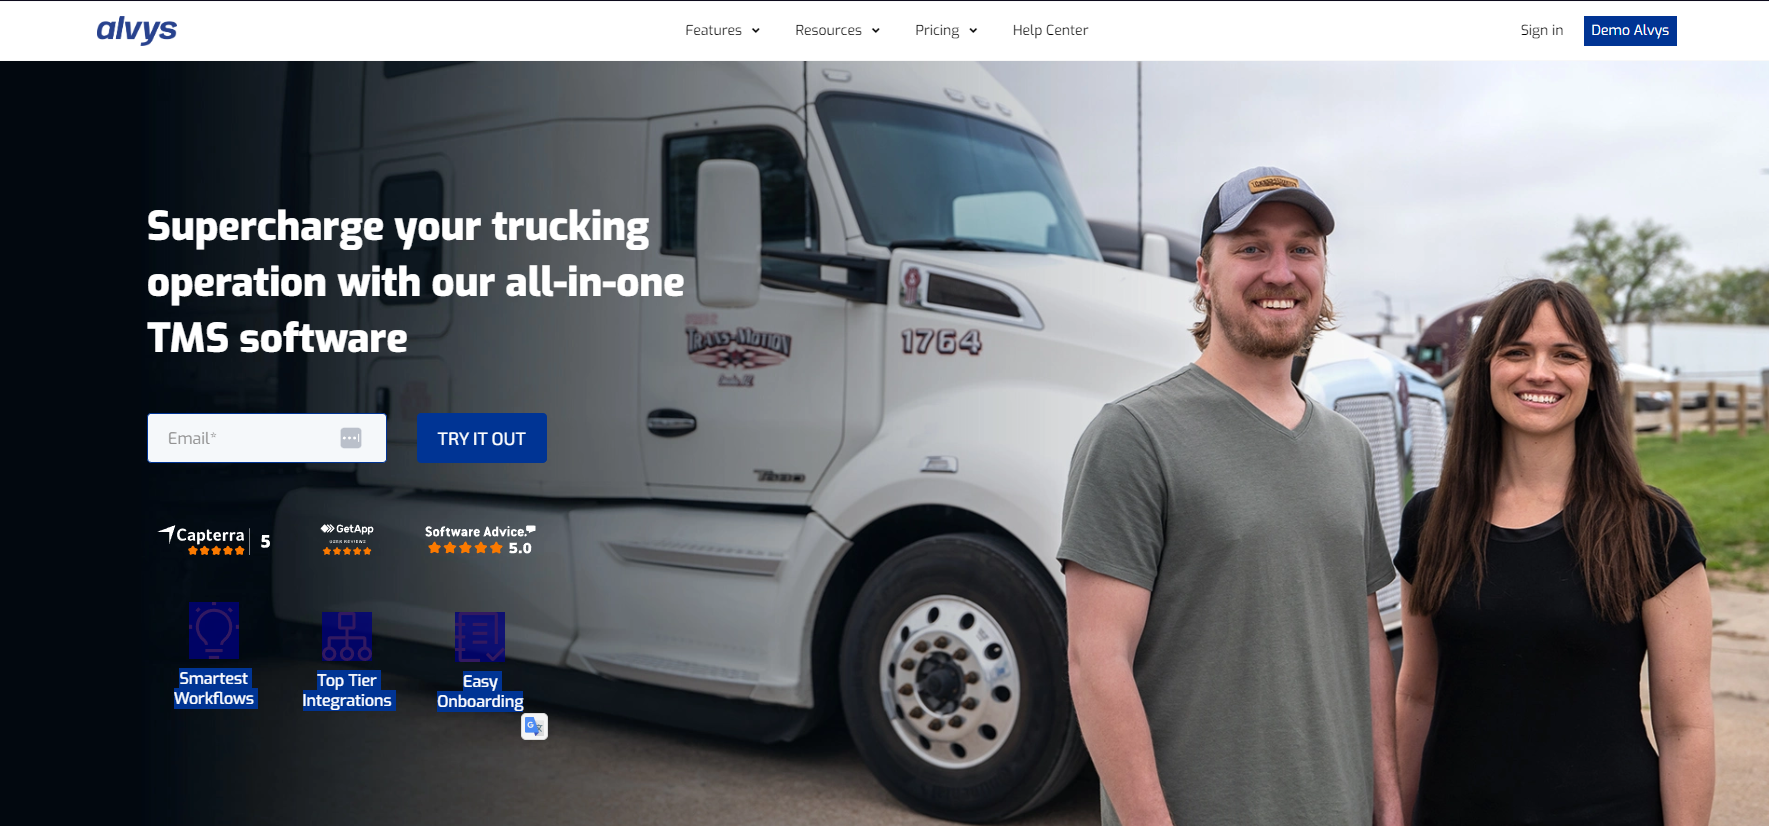 Alvys, with $6.3M in Seed Funding, is the startup that’s disrupting the trucking industry with its cutting-edge software solutions.